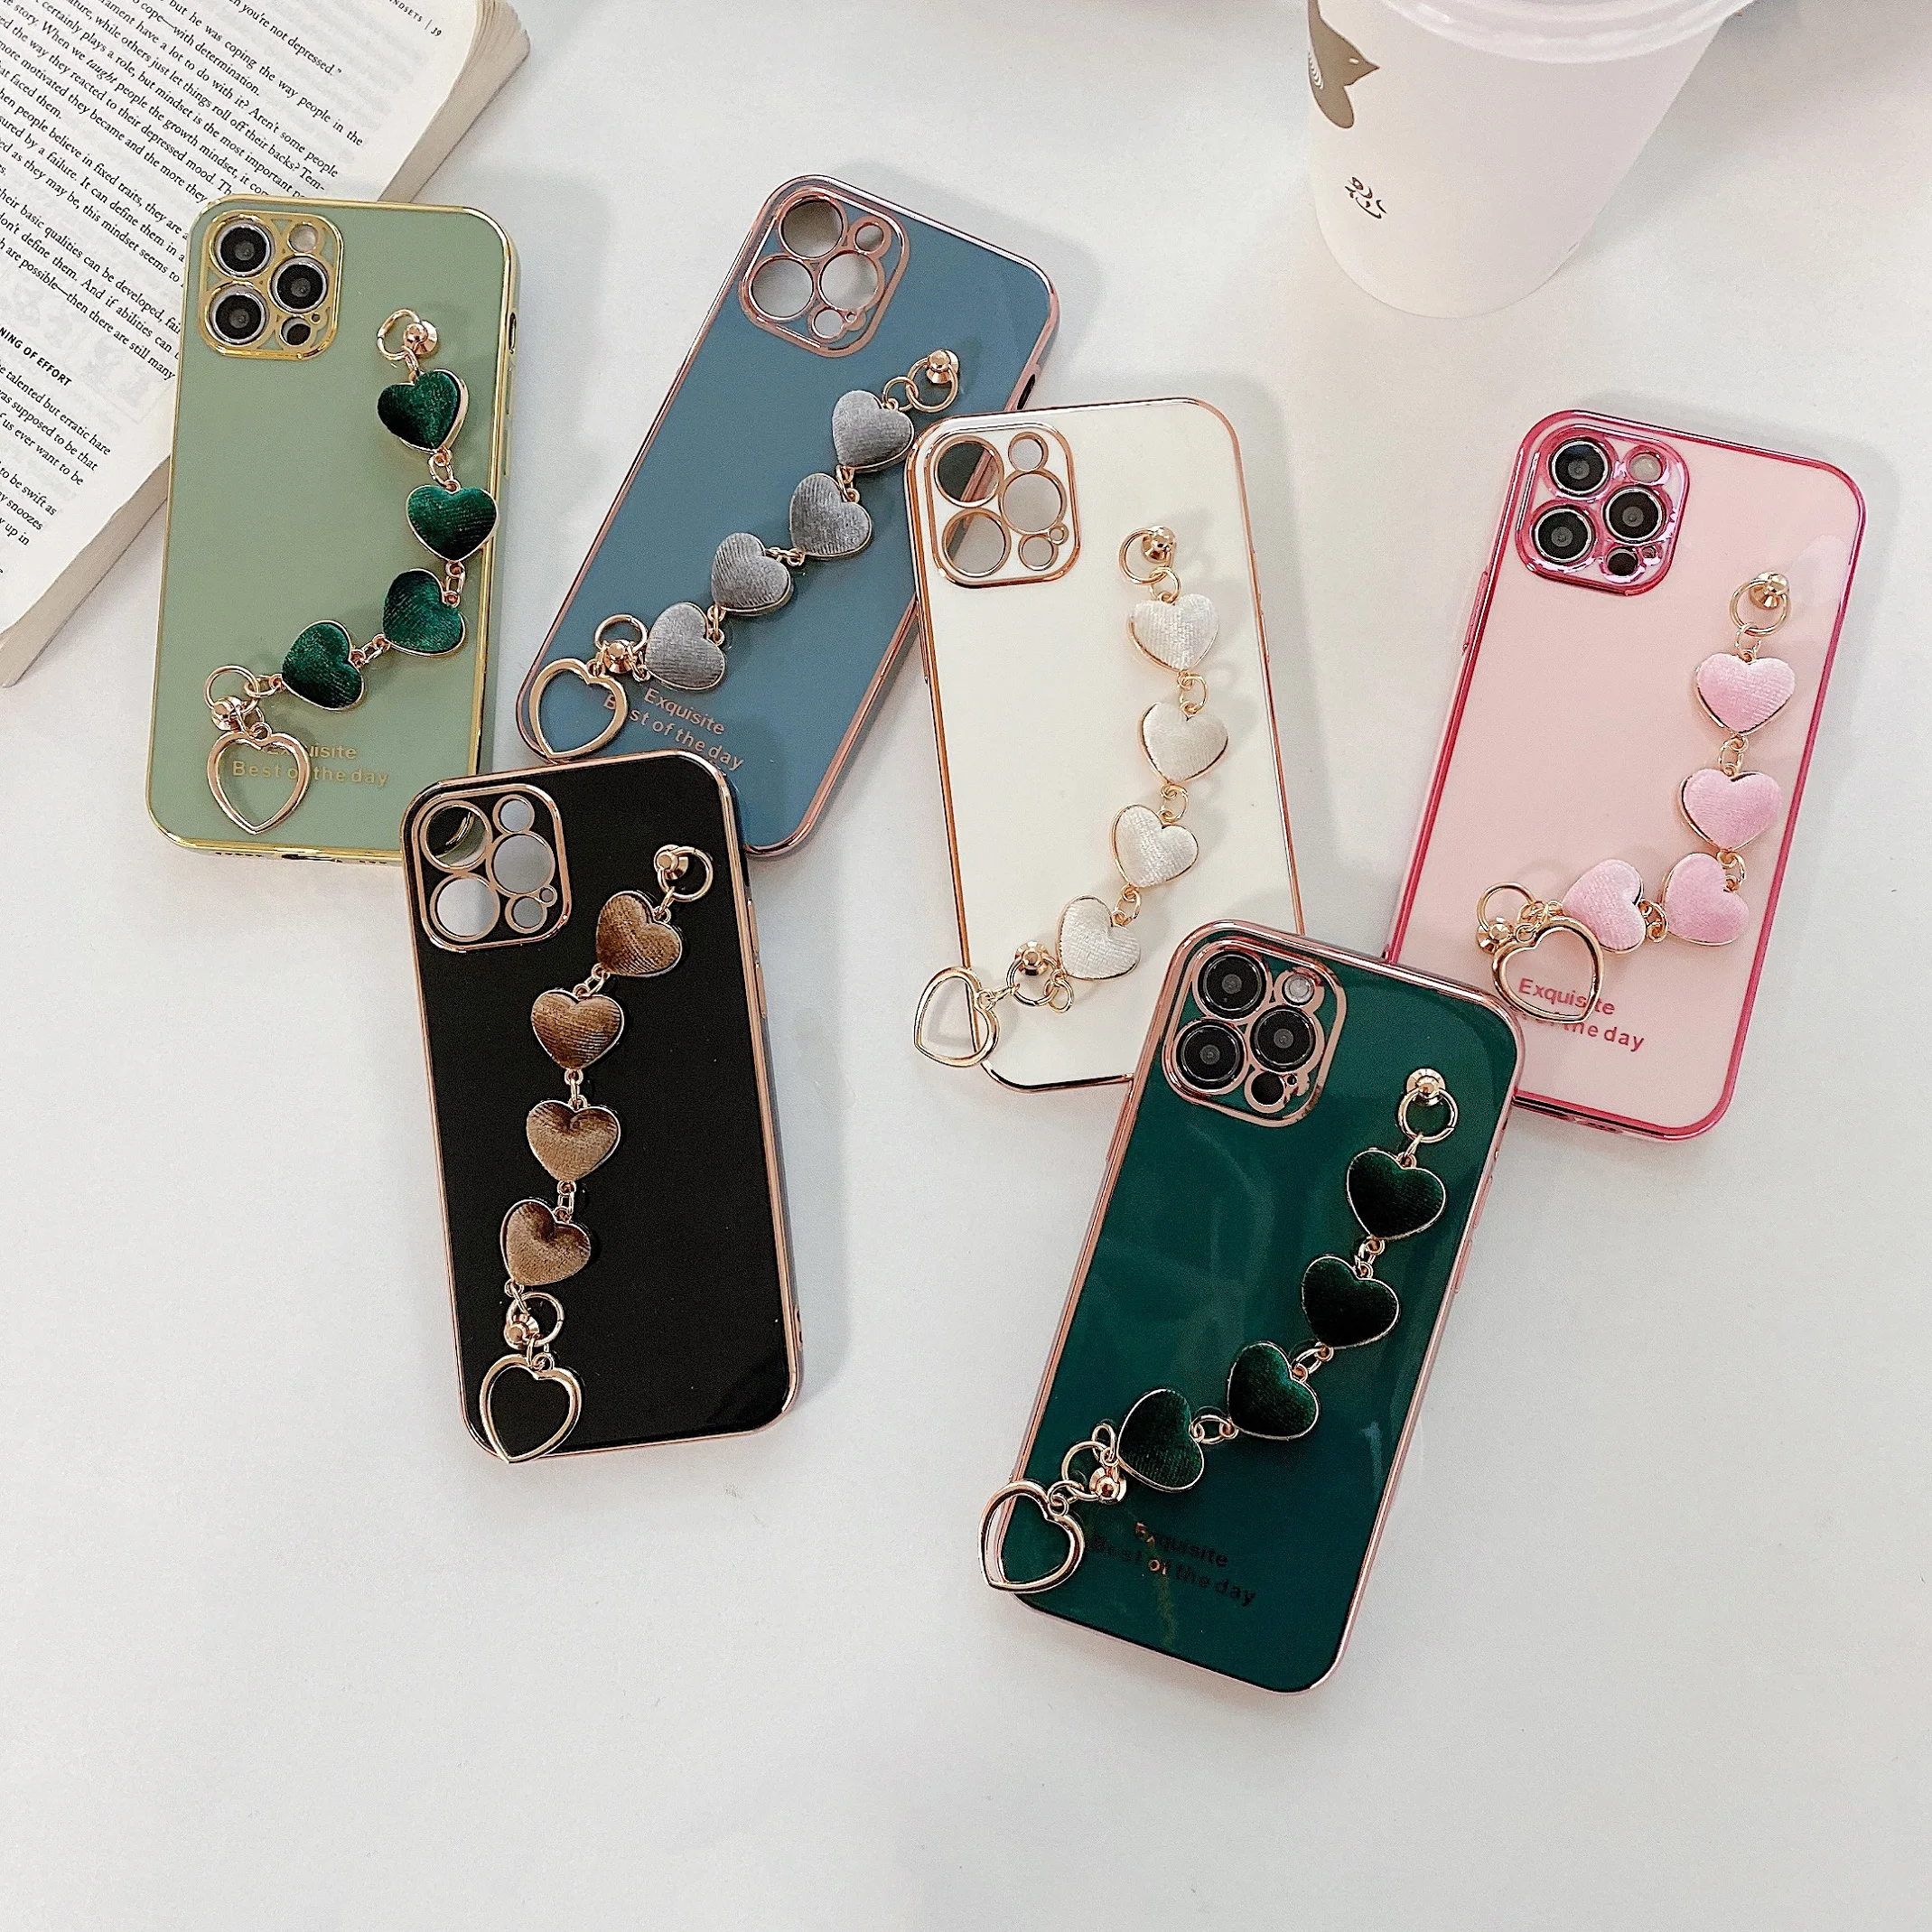 

Luxury Girly Glossy Warm Phone Case with Love Heart Shape Metal Chain Strap for iPhone 11 12 13 Pro Max for HUAWEI for Samsun, Multiple colors